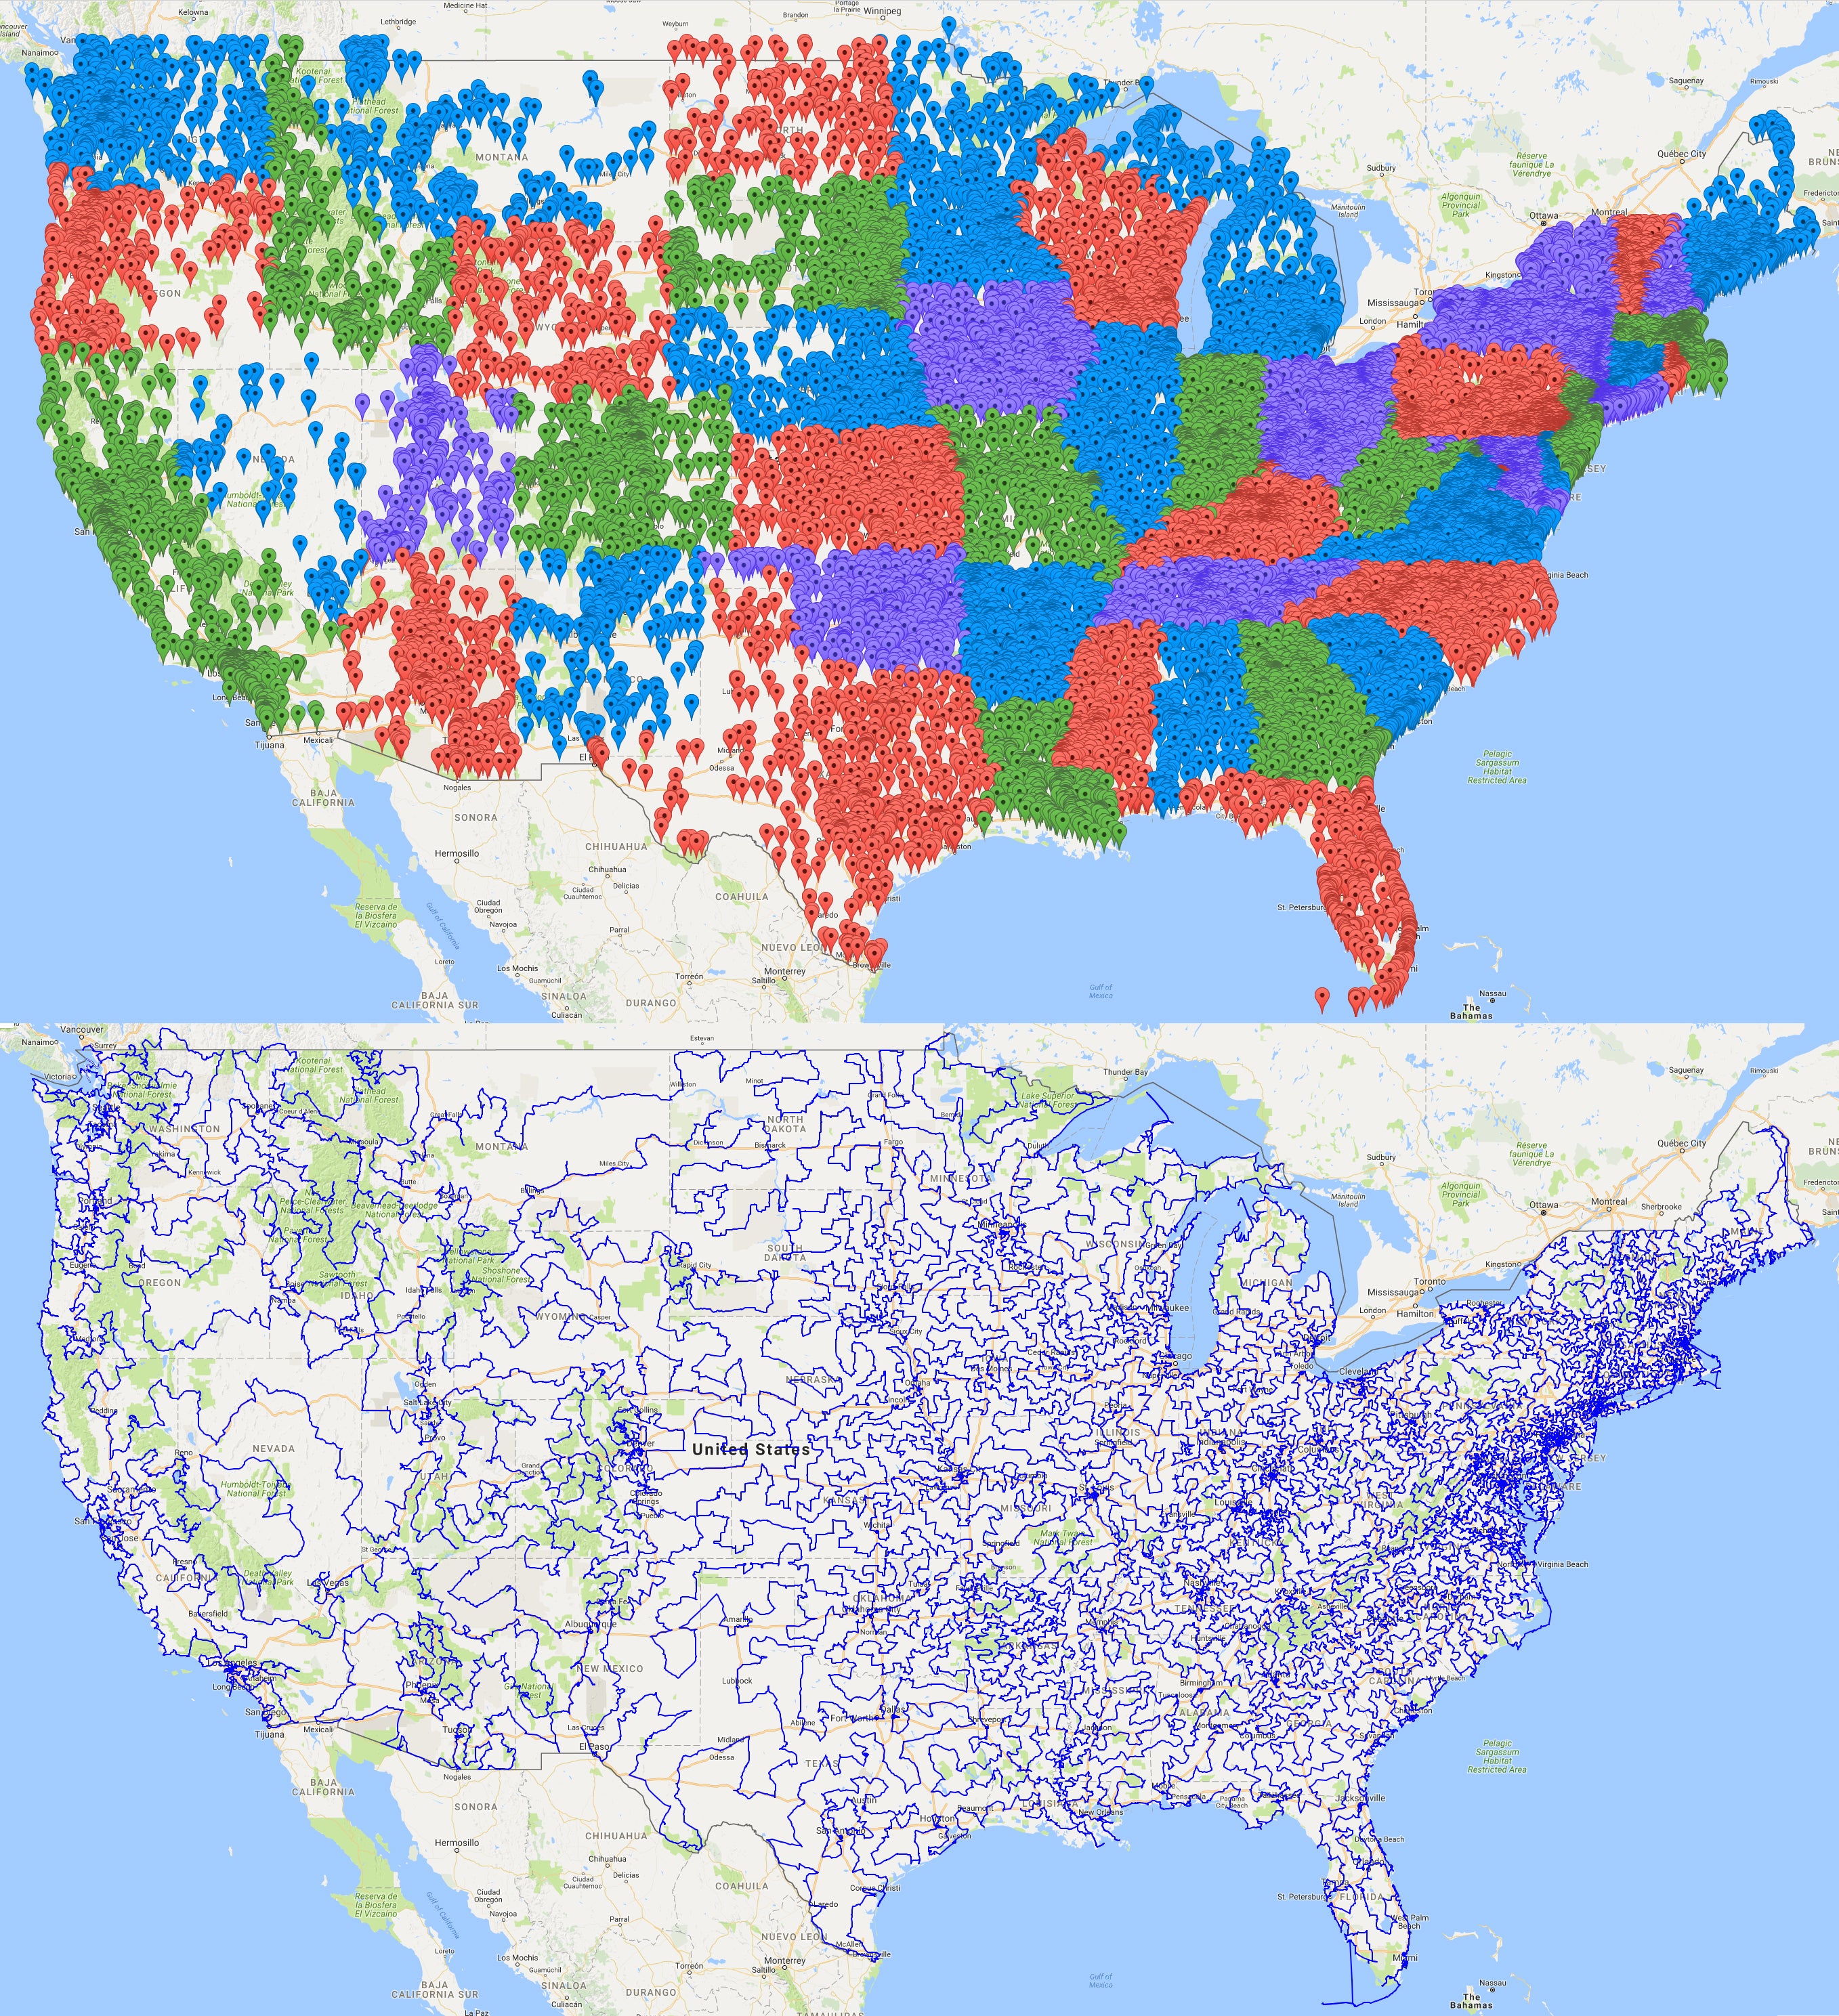 Images of data points computed using the traveling salesman problem, and of the optimal tour created of the 49,603 sites from the US National Register of Historic Places